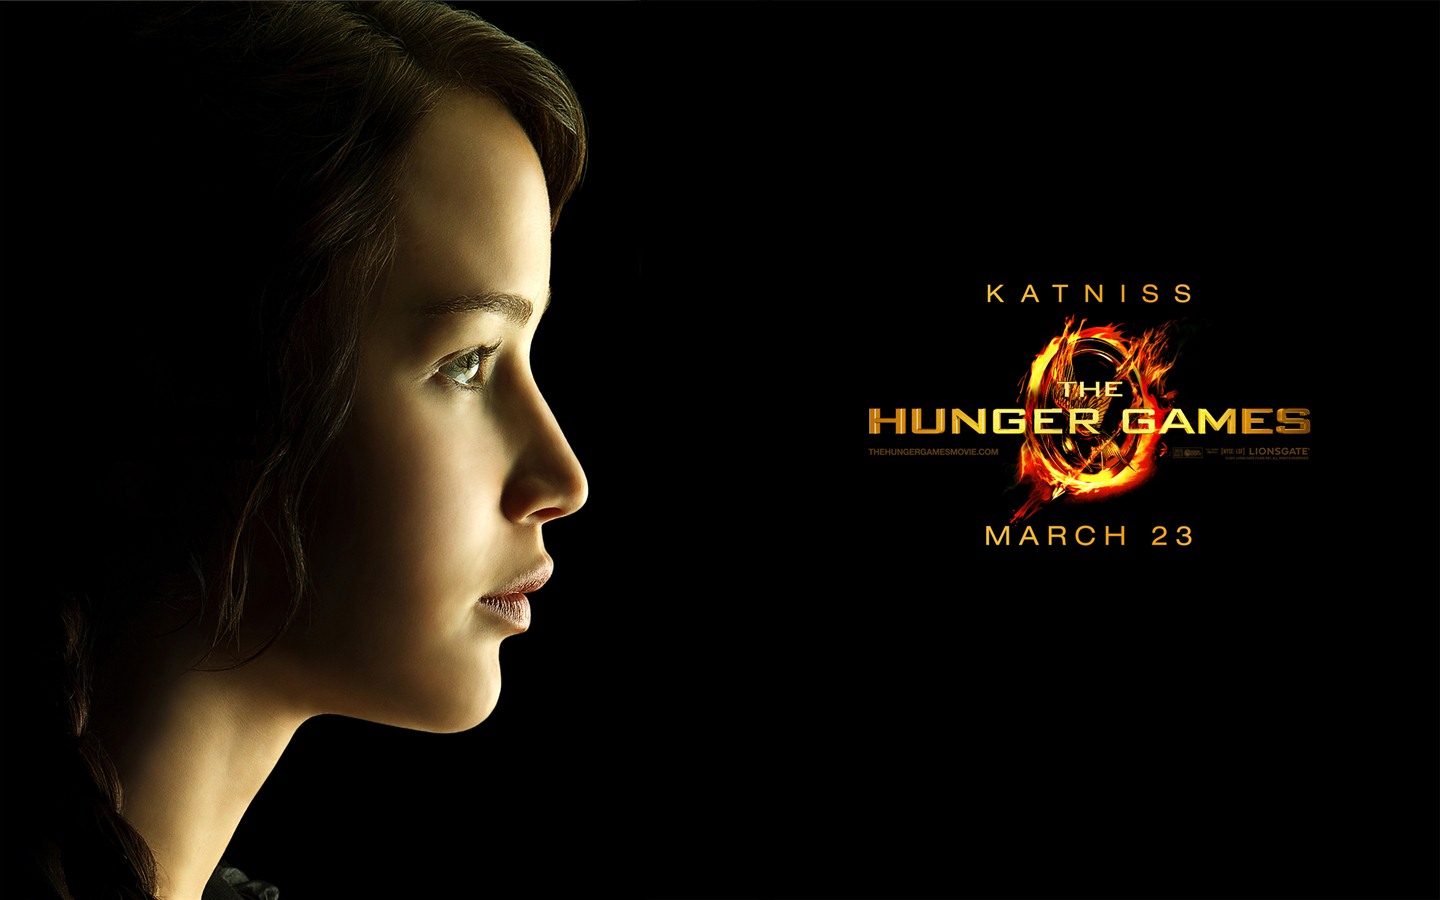 The Hunger Games HD wallpapers #14 - 1440x900